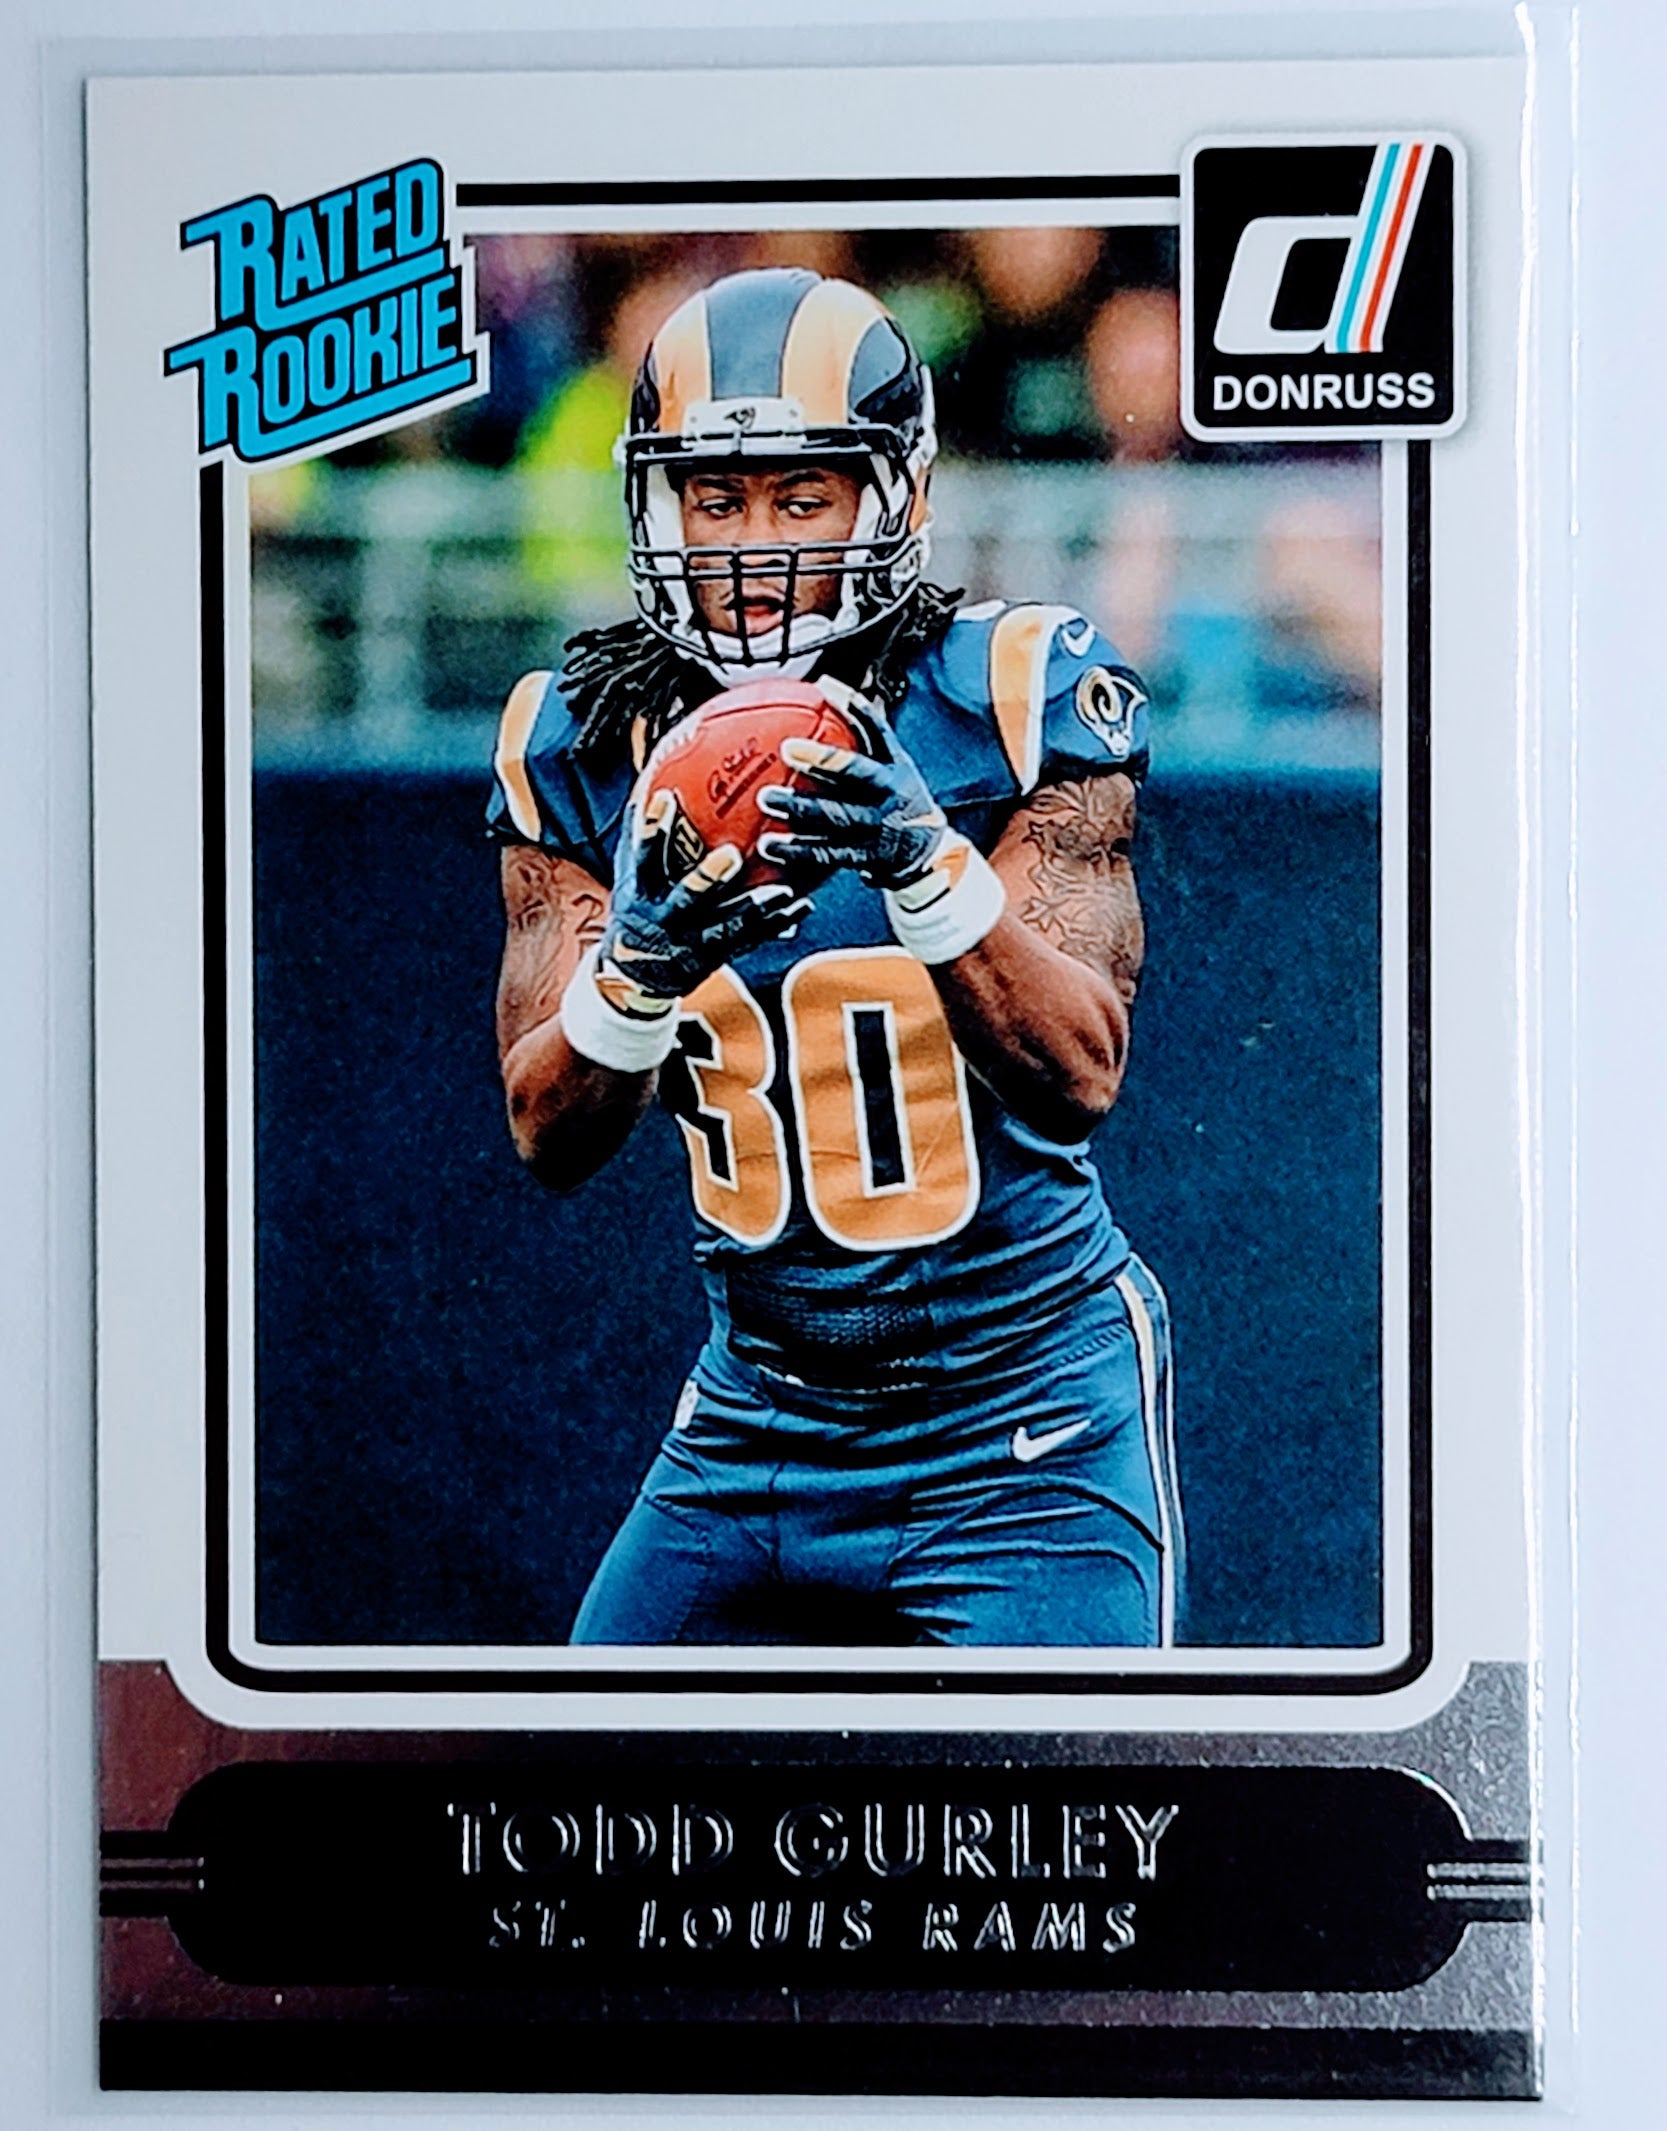 2015 Donruss Todd Gurley   RR, RC St. Louis Rams Football Card  TH1CB simple Xclusive Collectibles   